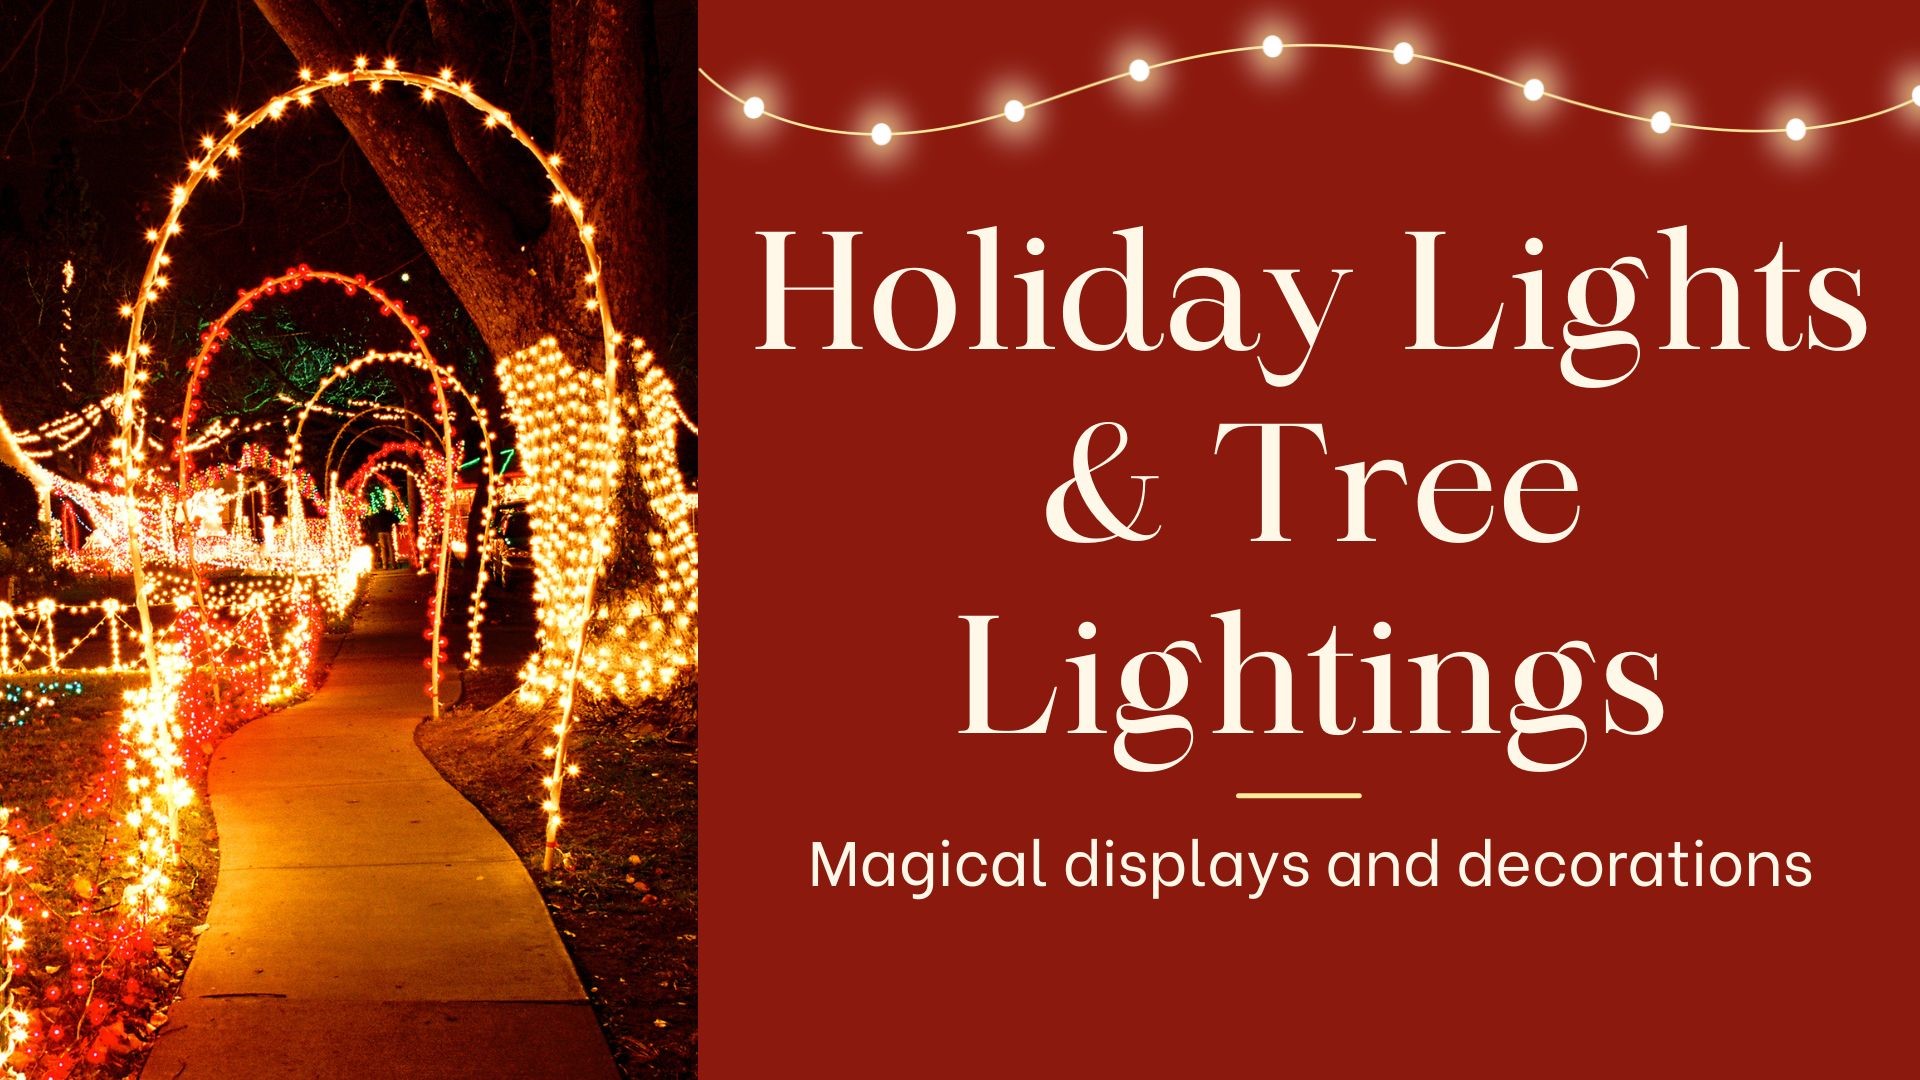 A look at different holiday light displays around the world, plus a glimpse into different tree lighting ceremonies in the U.S. in 2023.